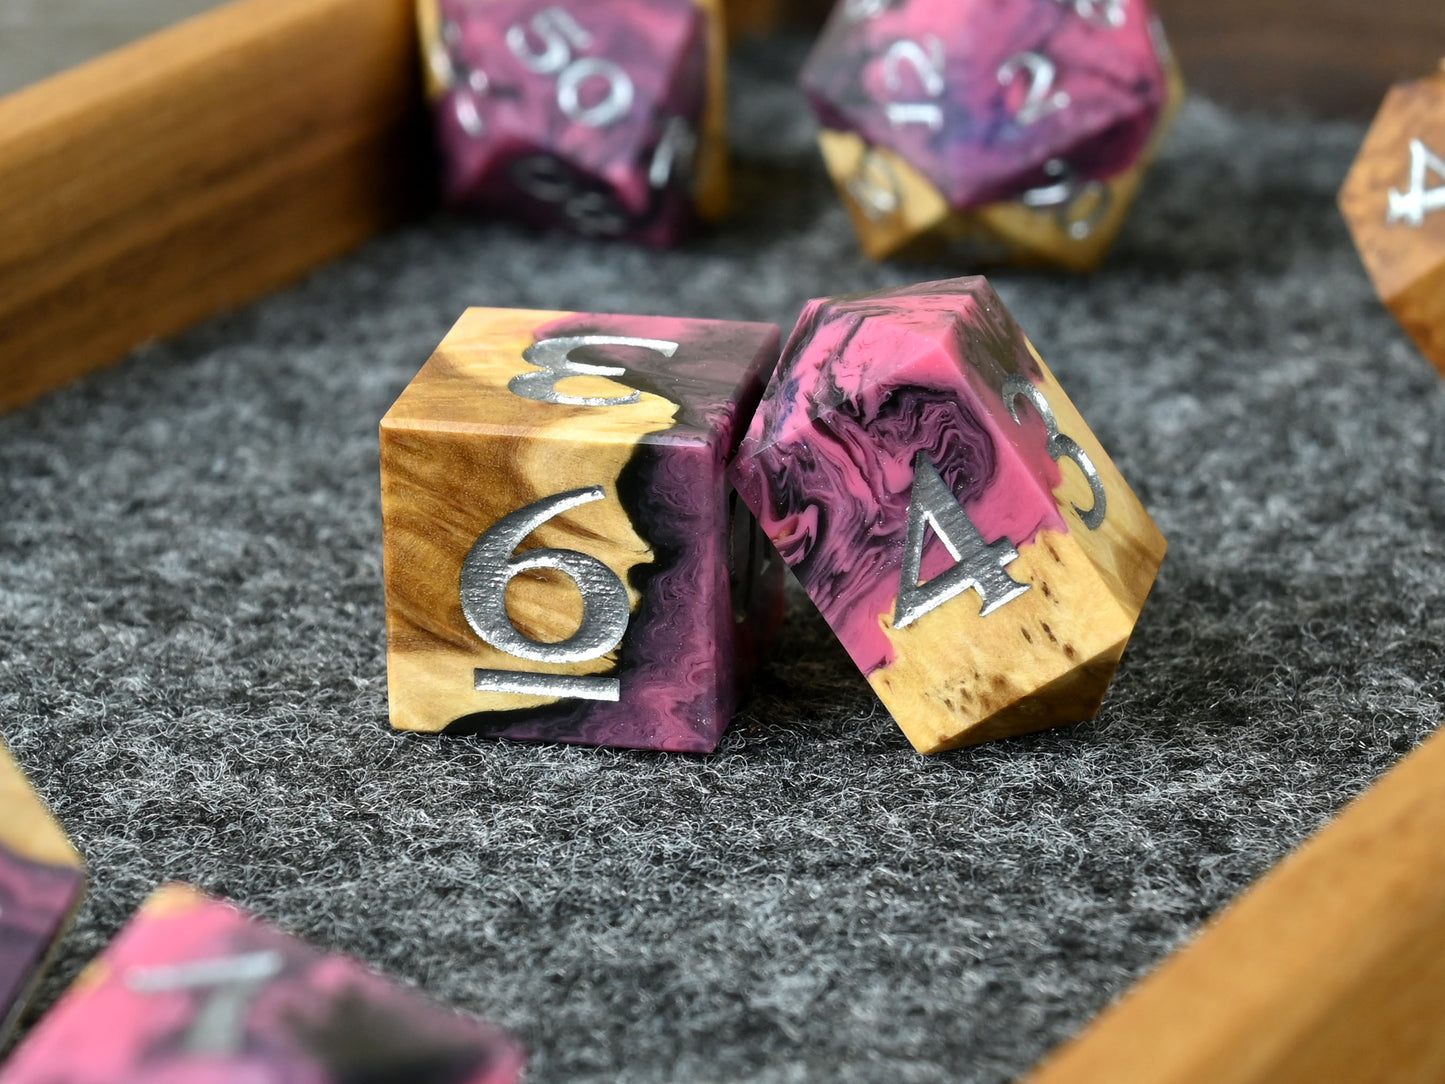 Sirens Invocation brown mallee wood and resin hybrid dice set for D&D ttrpg.